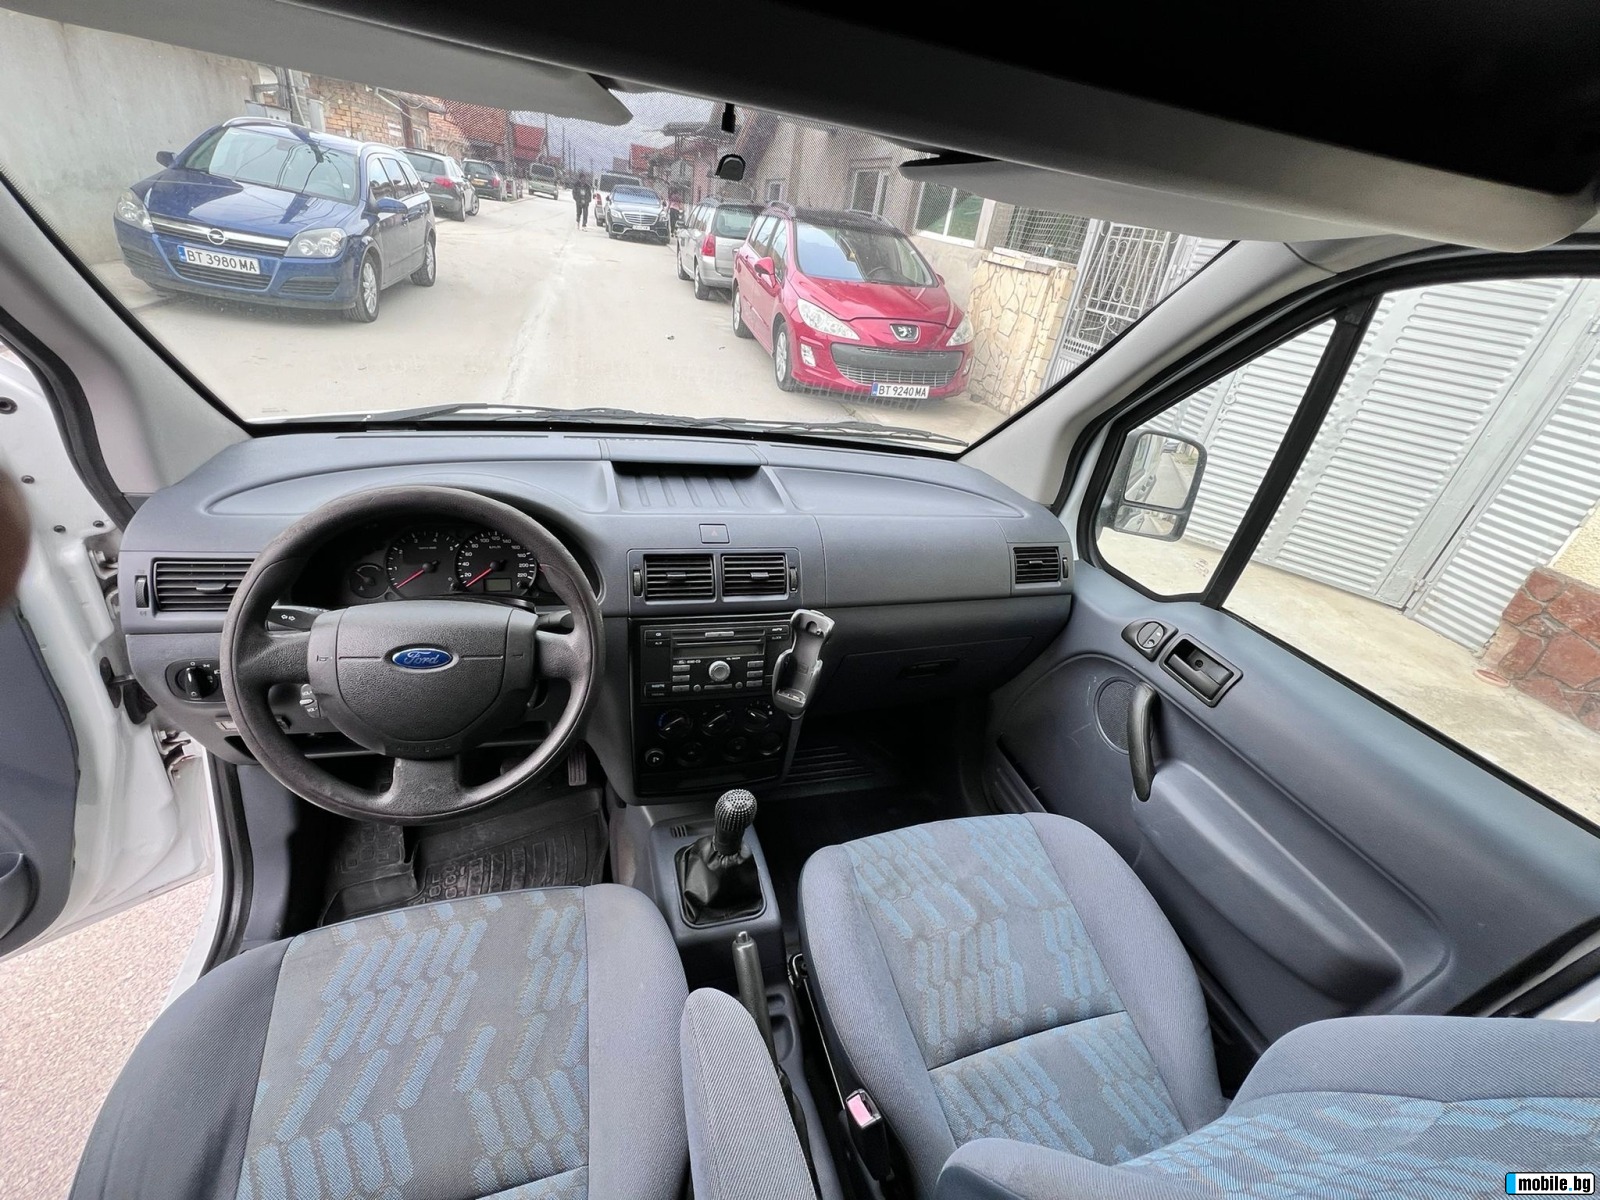 Ford Connect T230L 1.8TDCi | Mobile.bg   10